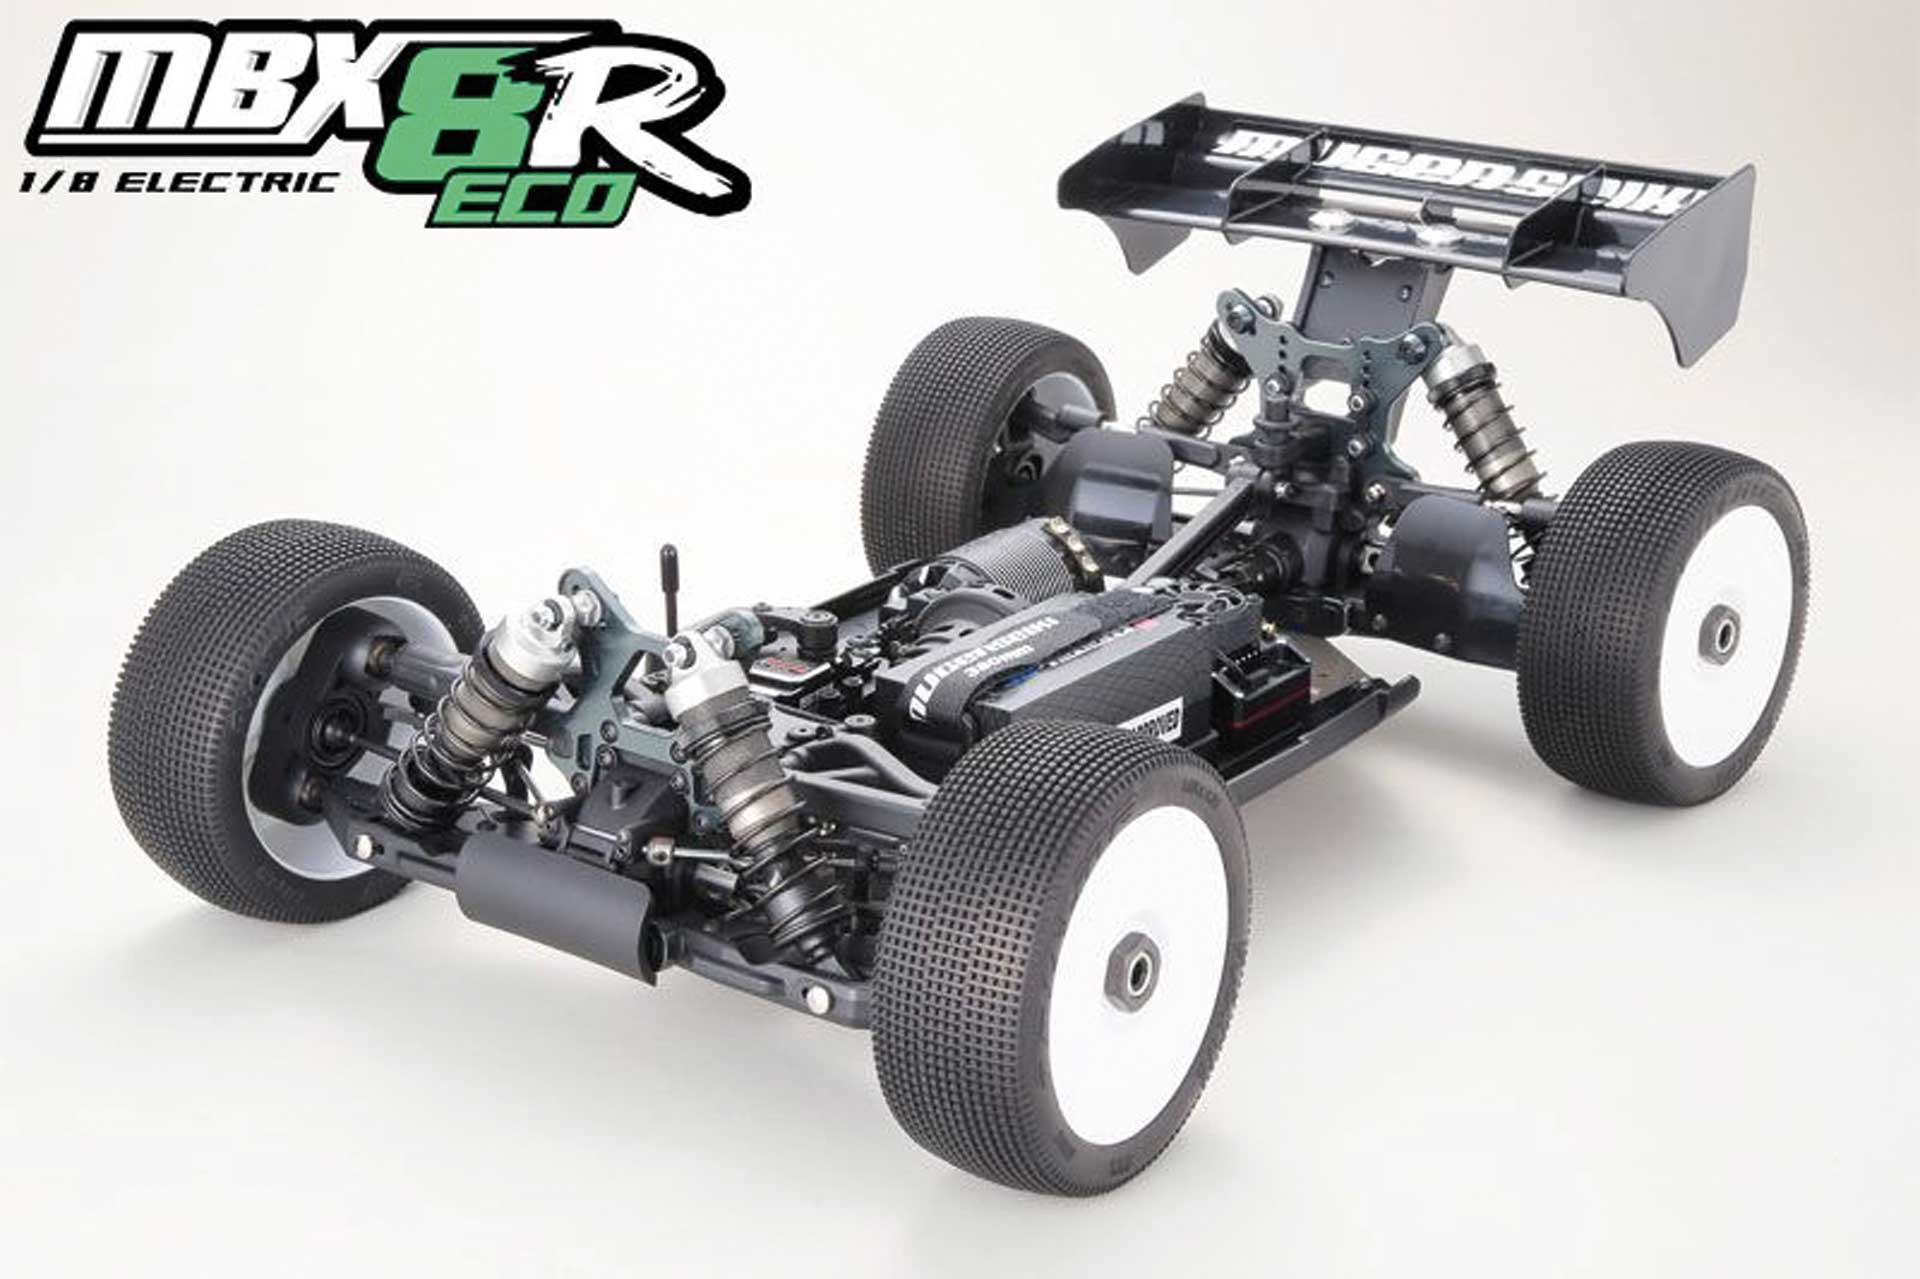 MUGEN MBX-8R 1/8 4WD OFF-ROAD BUGGY R-EDITION ECO KIT